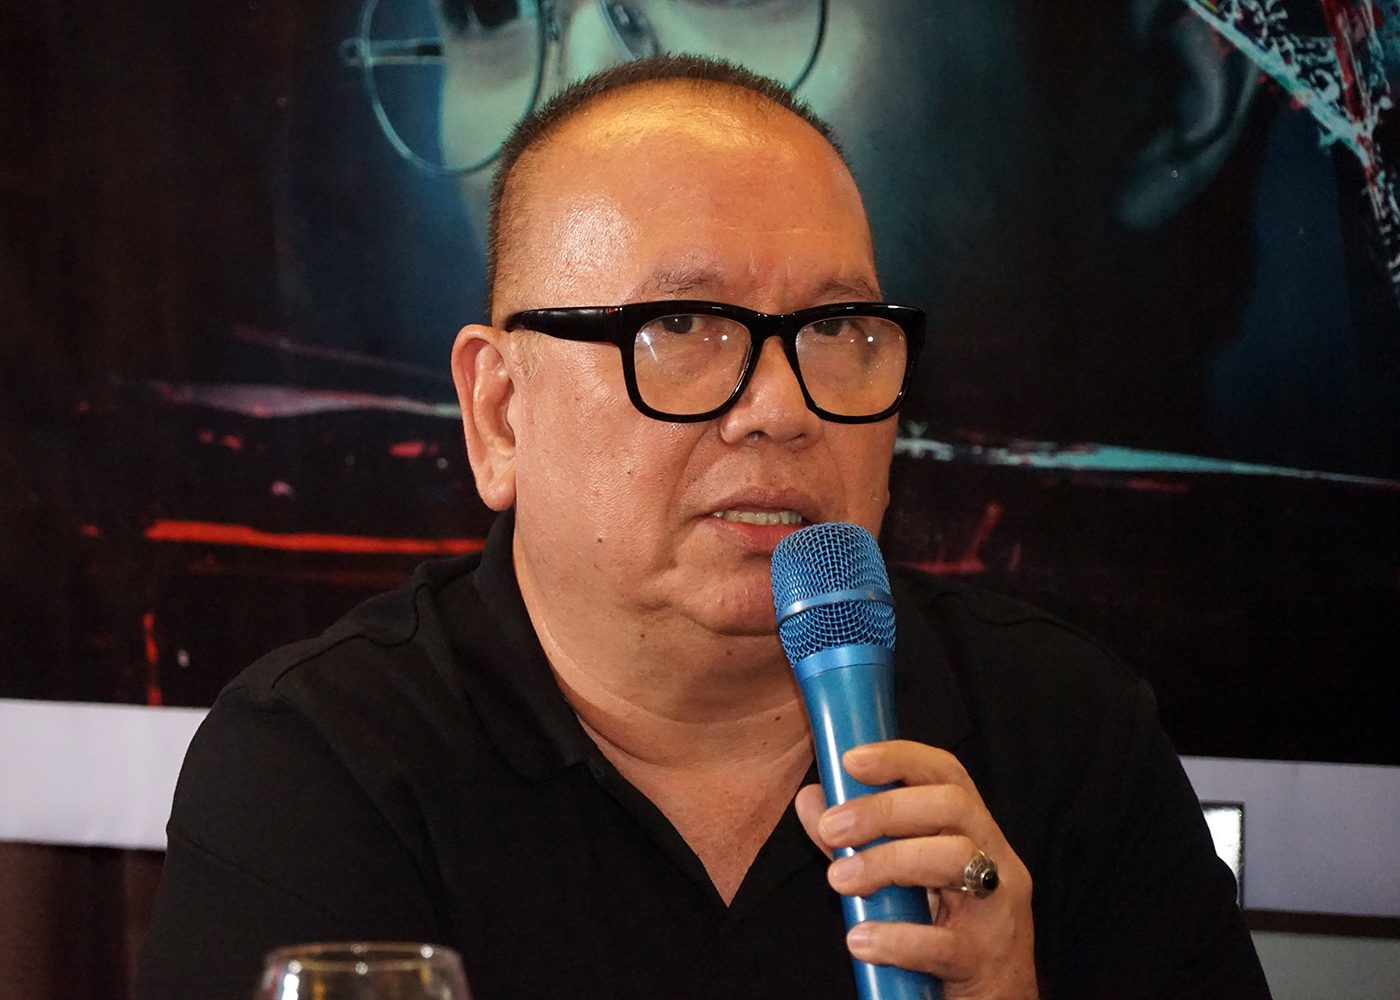 Director Jose Javier Reyes ‘infuriated’ at ‘hugot’ lines used in learning modules